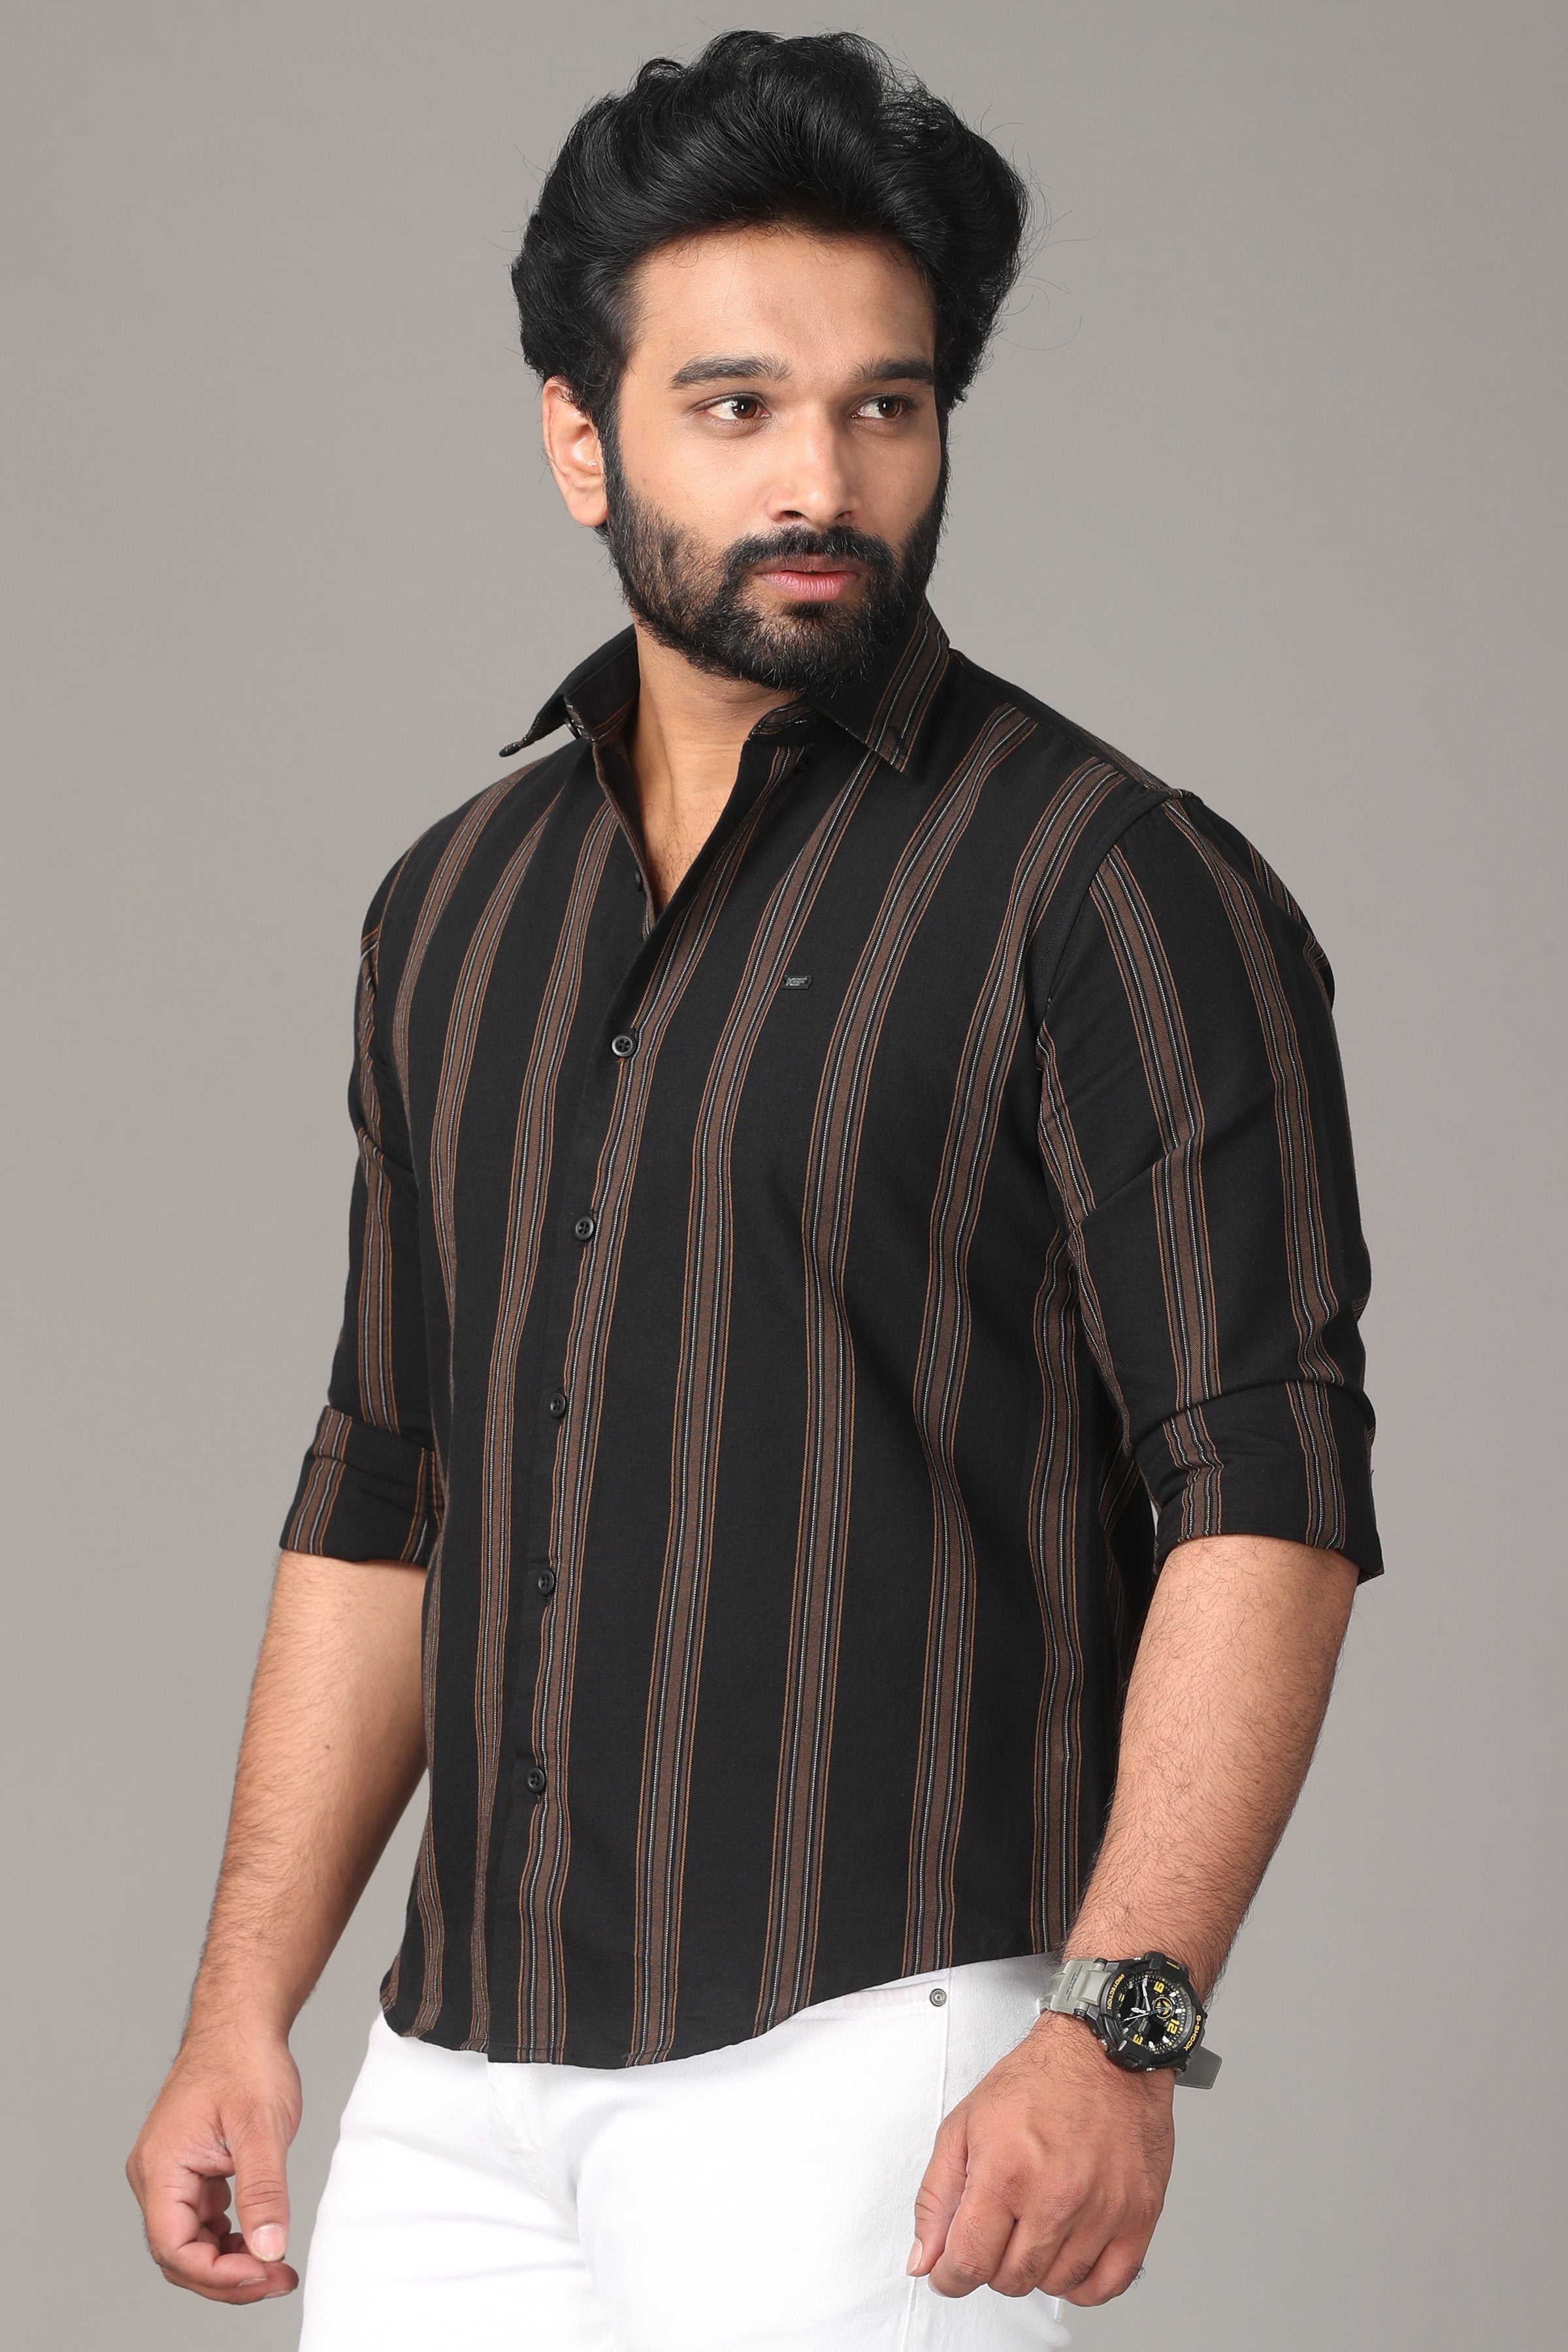 Black Full Sleeve Shirt with Brown Stripes Shirts KEF 